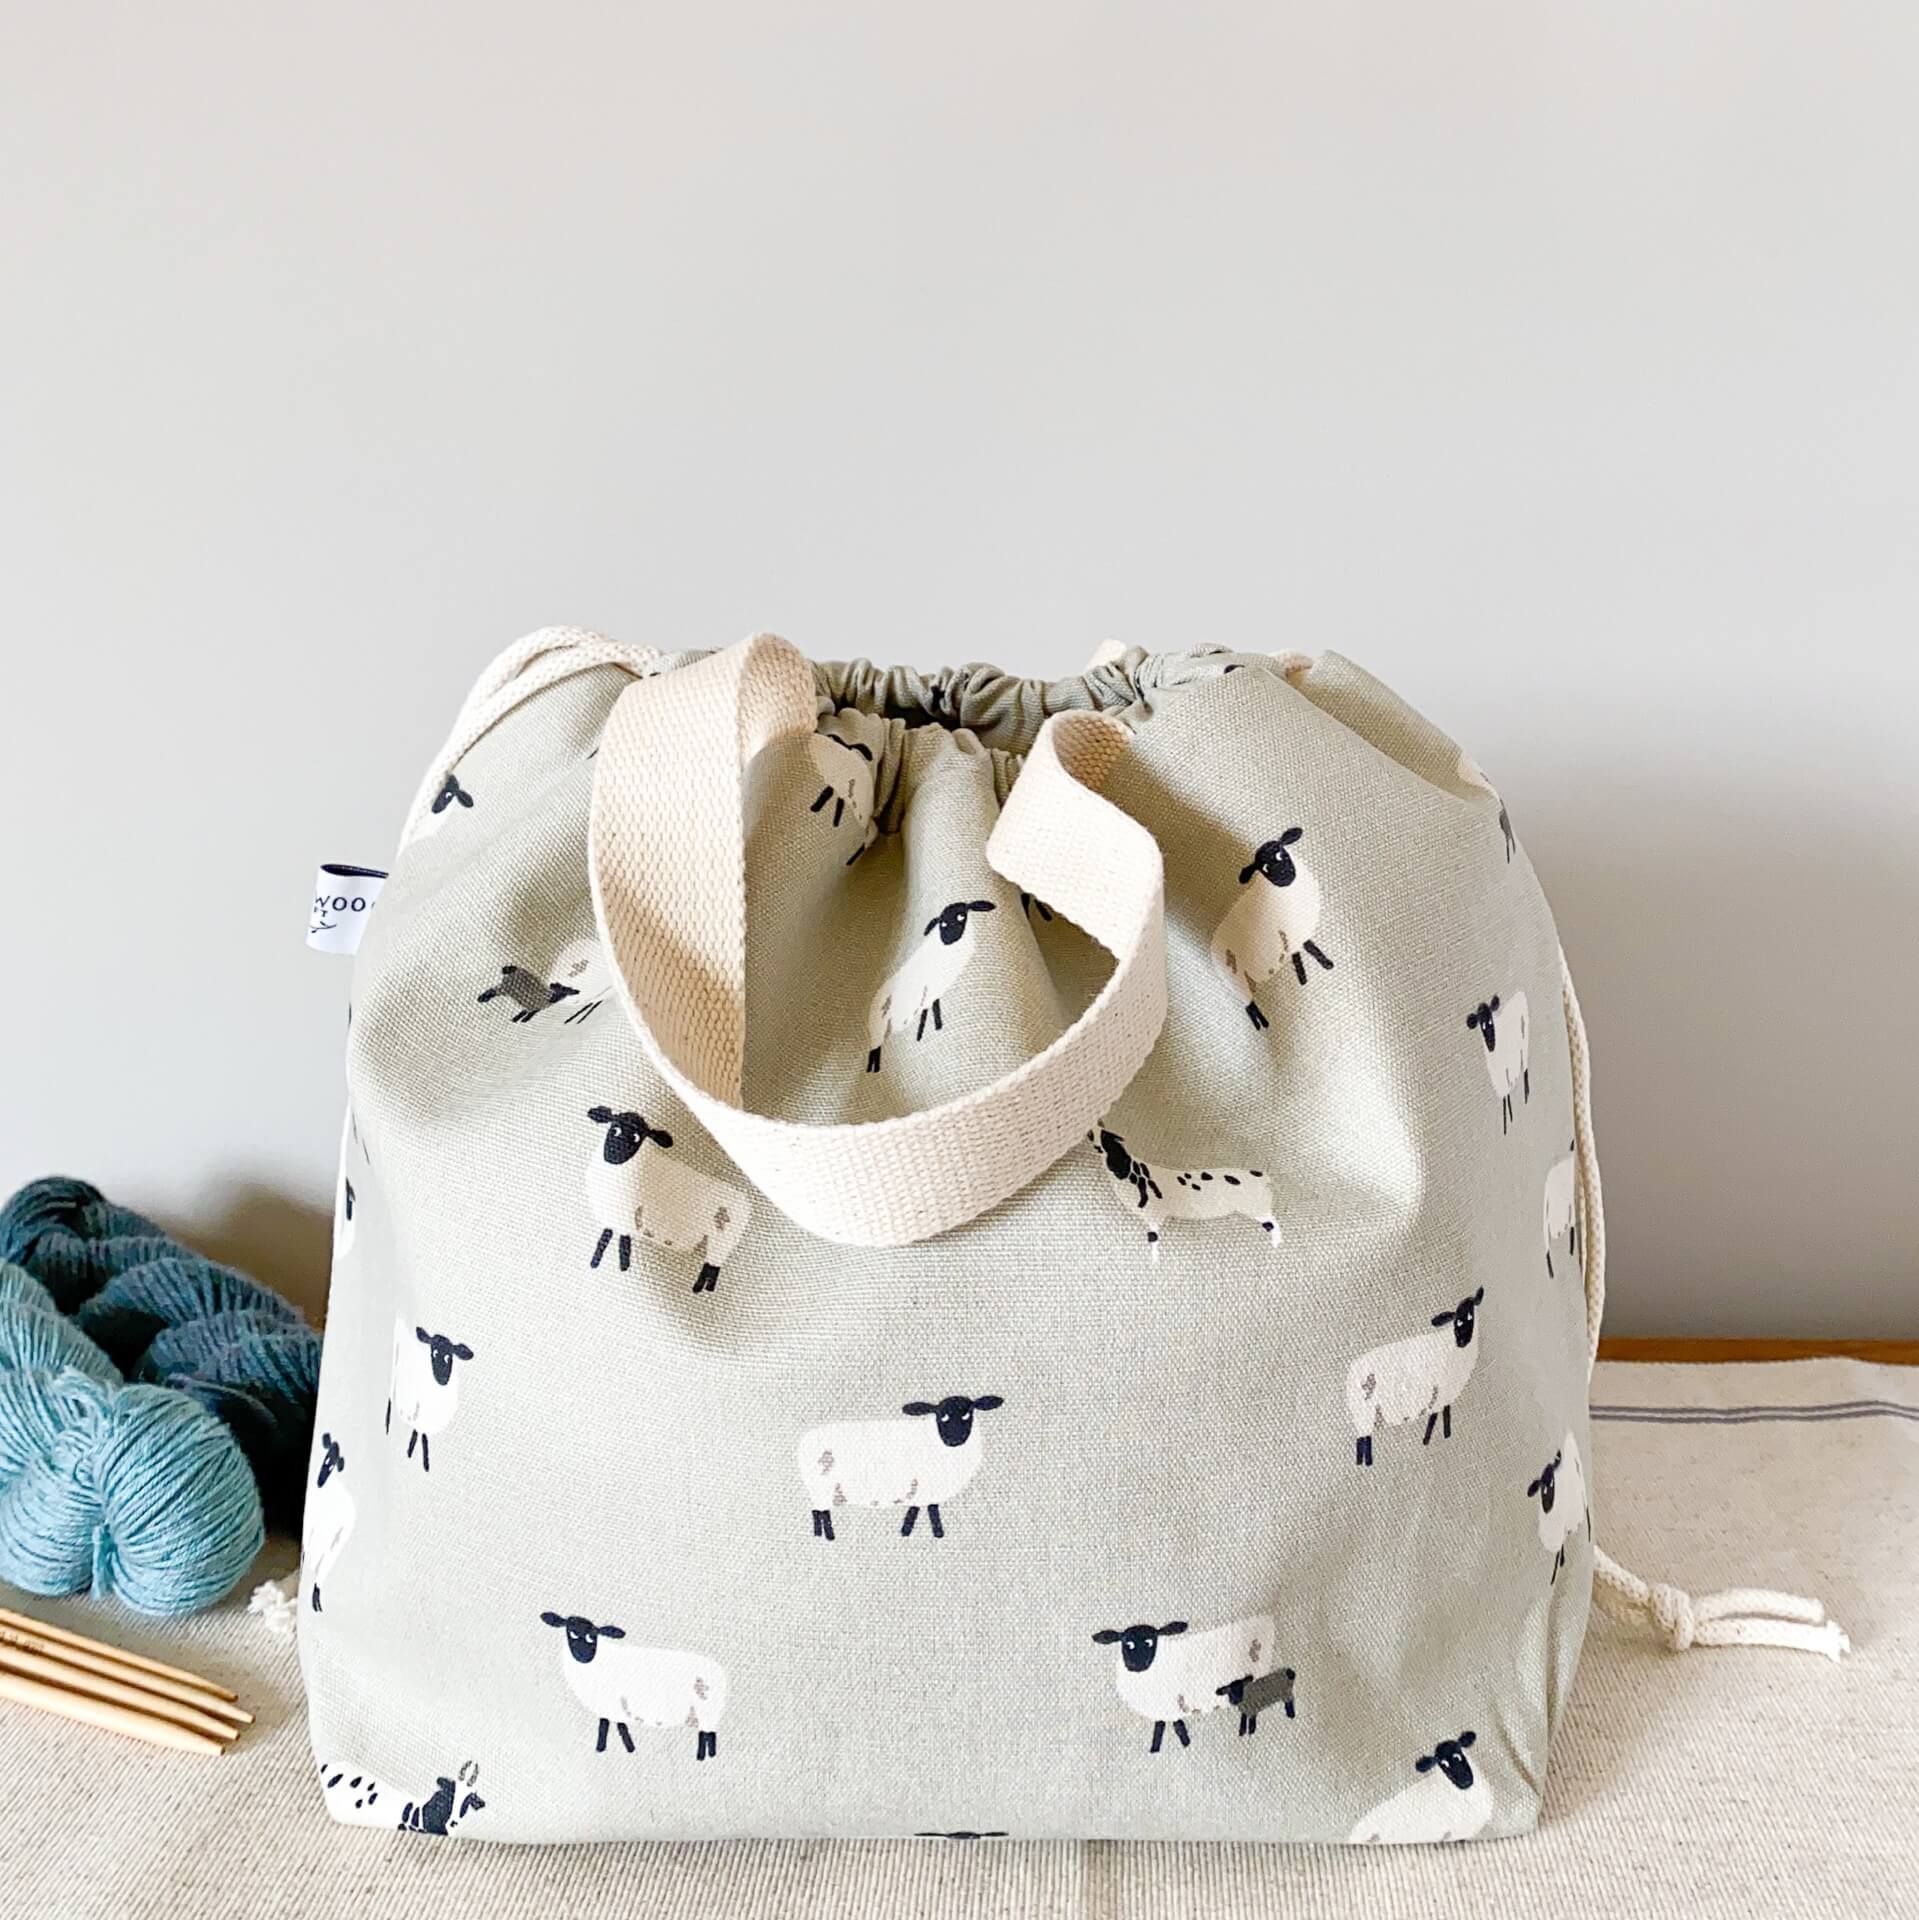 A large drawstring bag designed to hold knitting projects sits on a table next to two skeins of yarn and some wooden knitting needles. The bag features a sheepy pring fabric. The bag is pulled closed by a drawstring hiding its contents. 